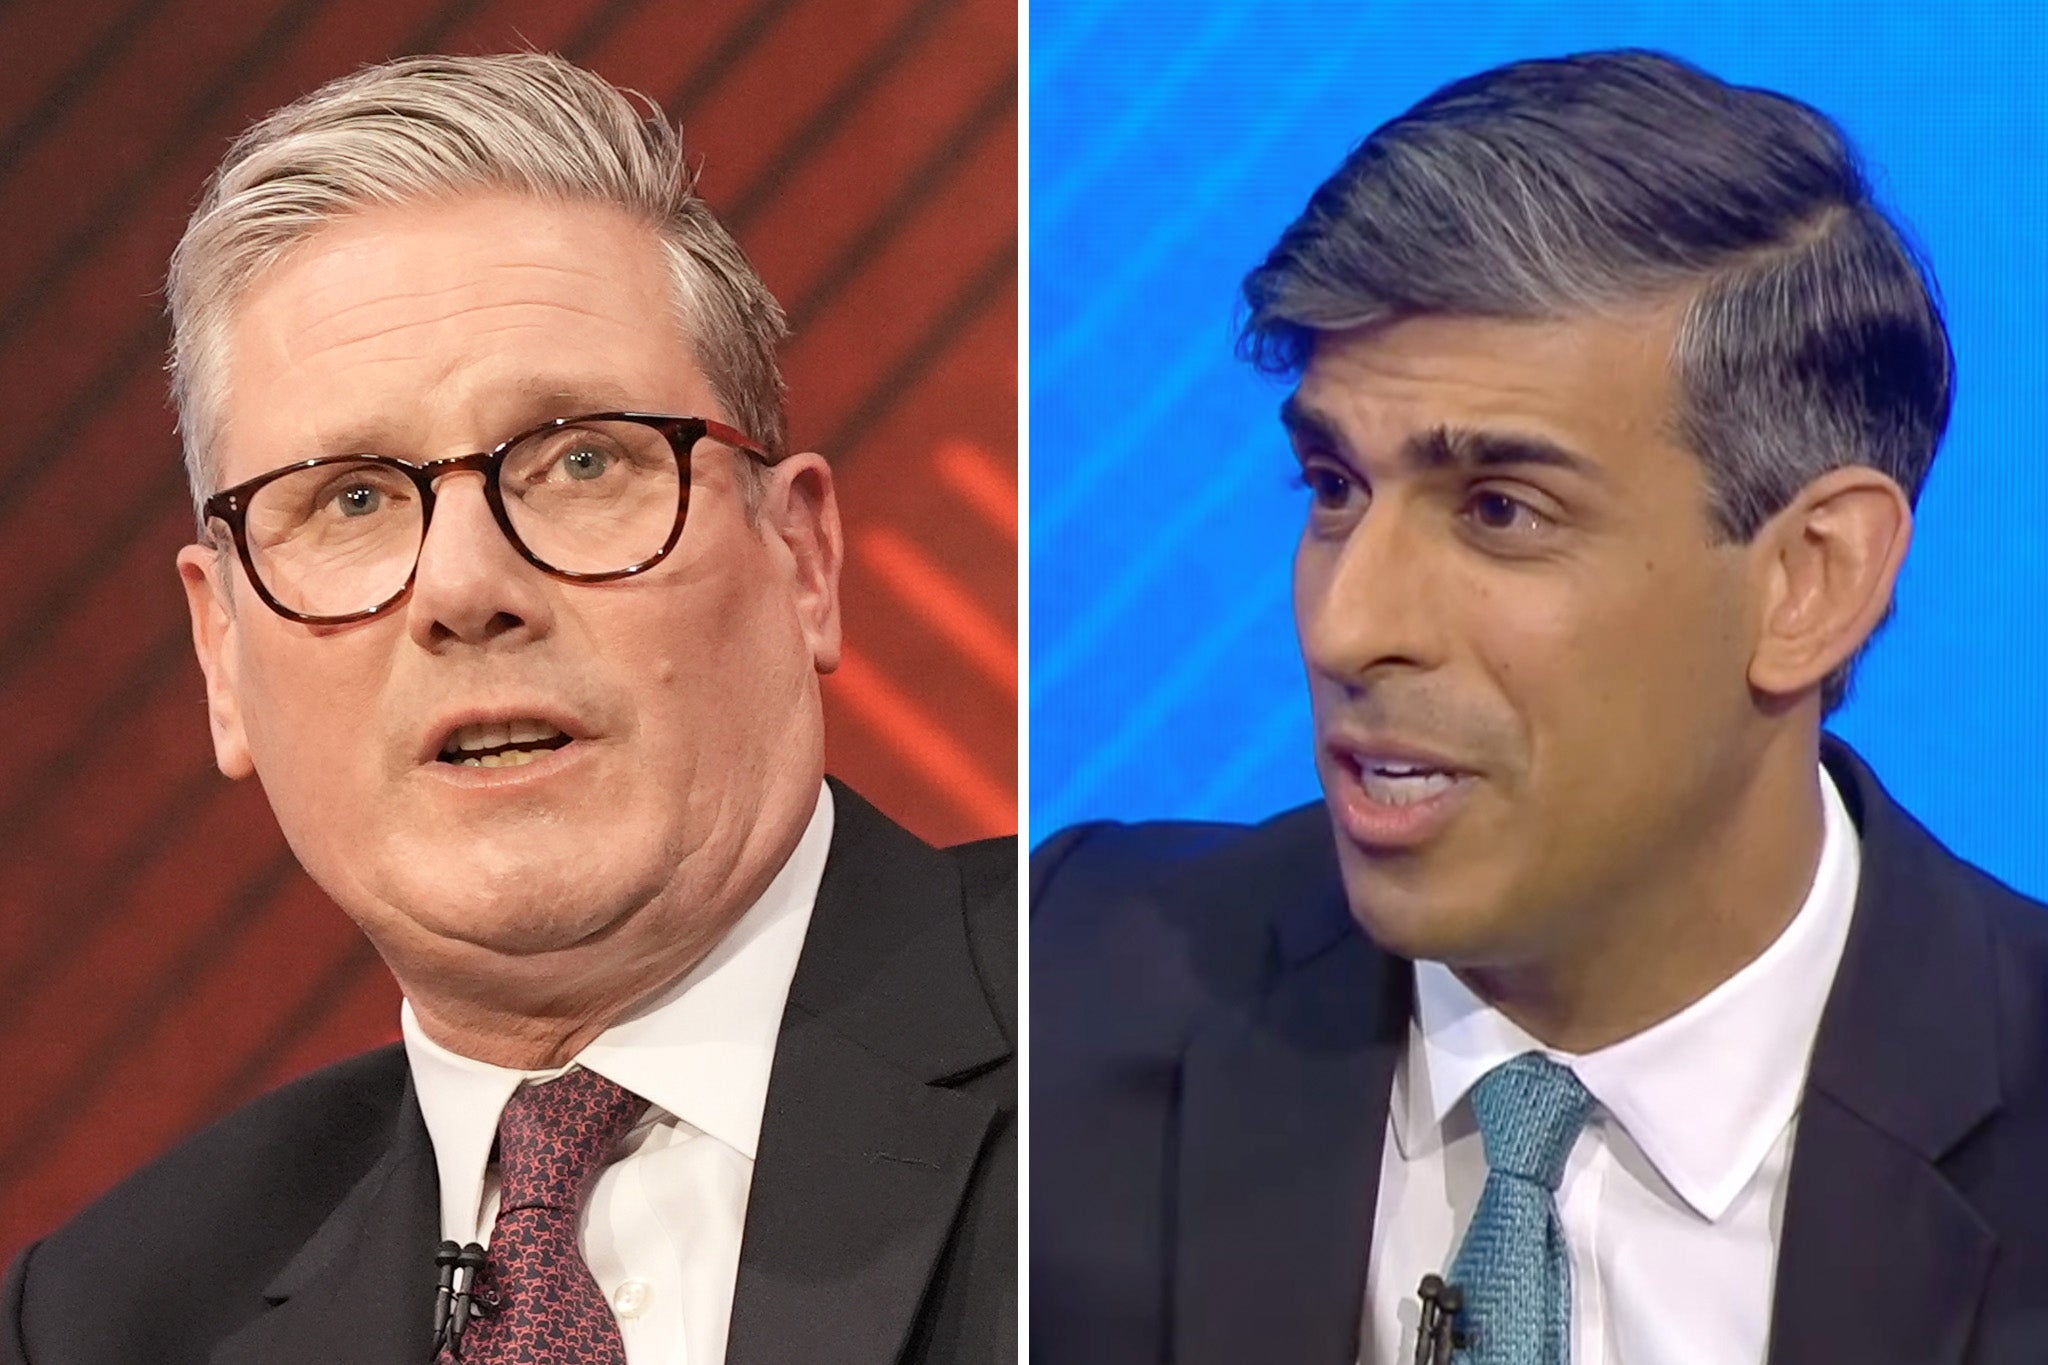 Rishi Sunak and Sir Keir Starmer went head-to-head for the third time